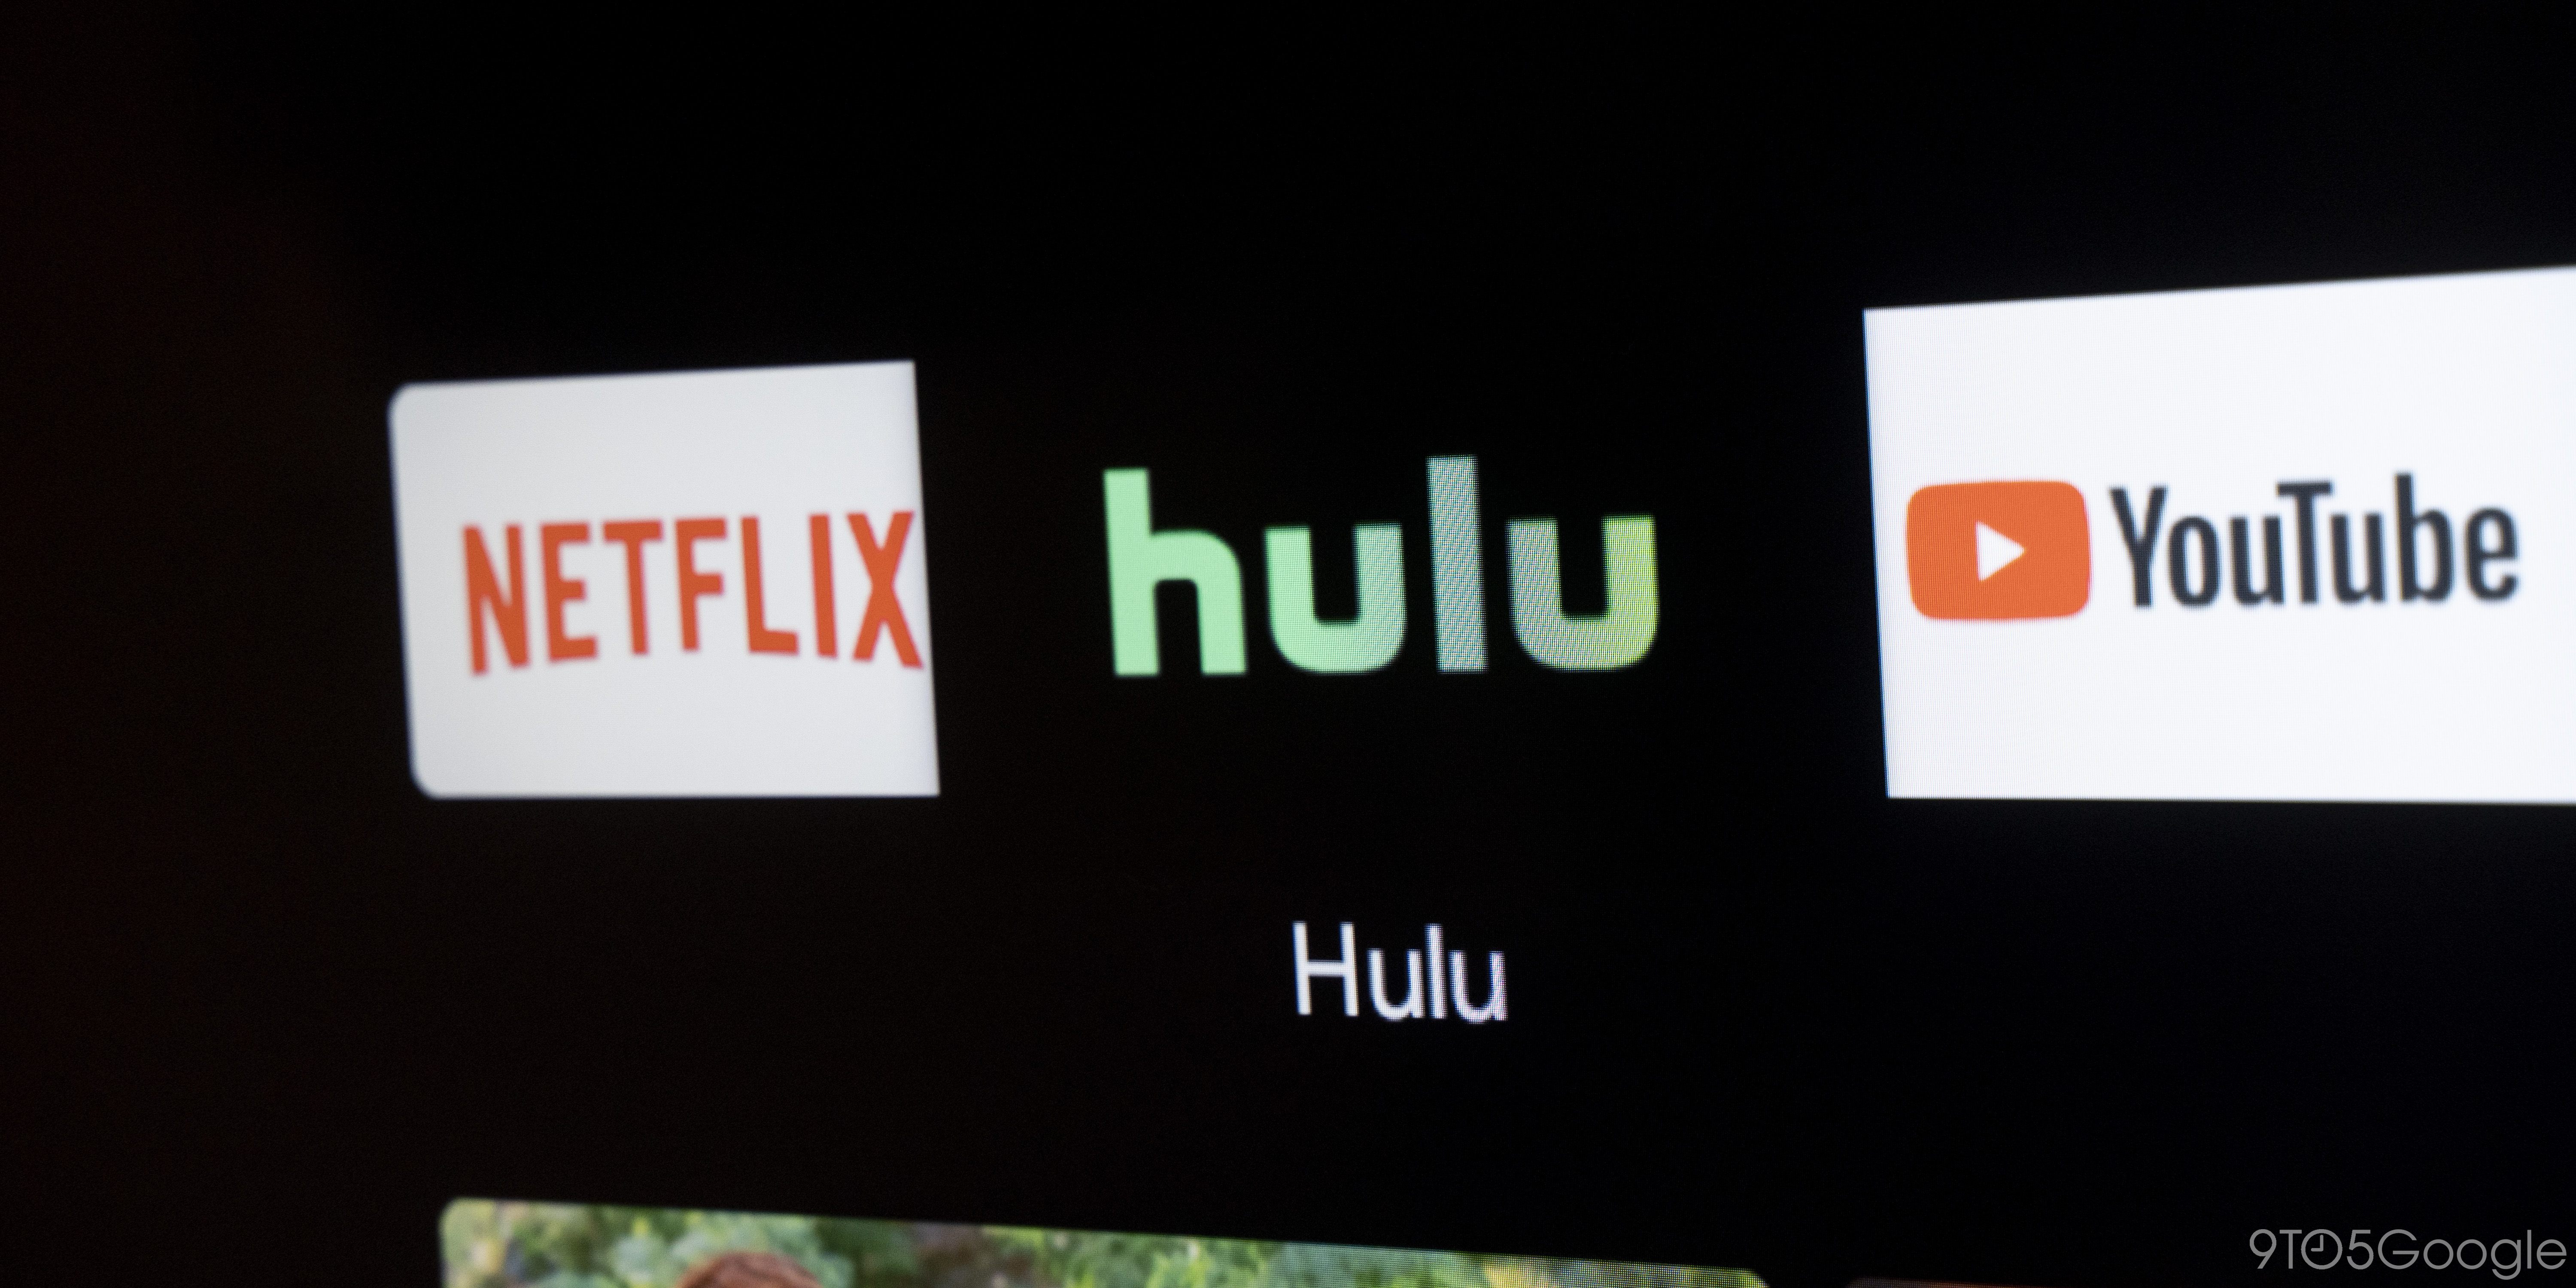 Hulu S Latest Android Tv Update Adds Better Remote Support 9to5google Are you searching for hulu icon png images or vector? 9to5google